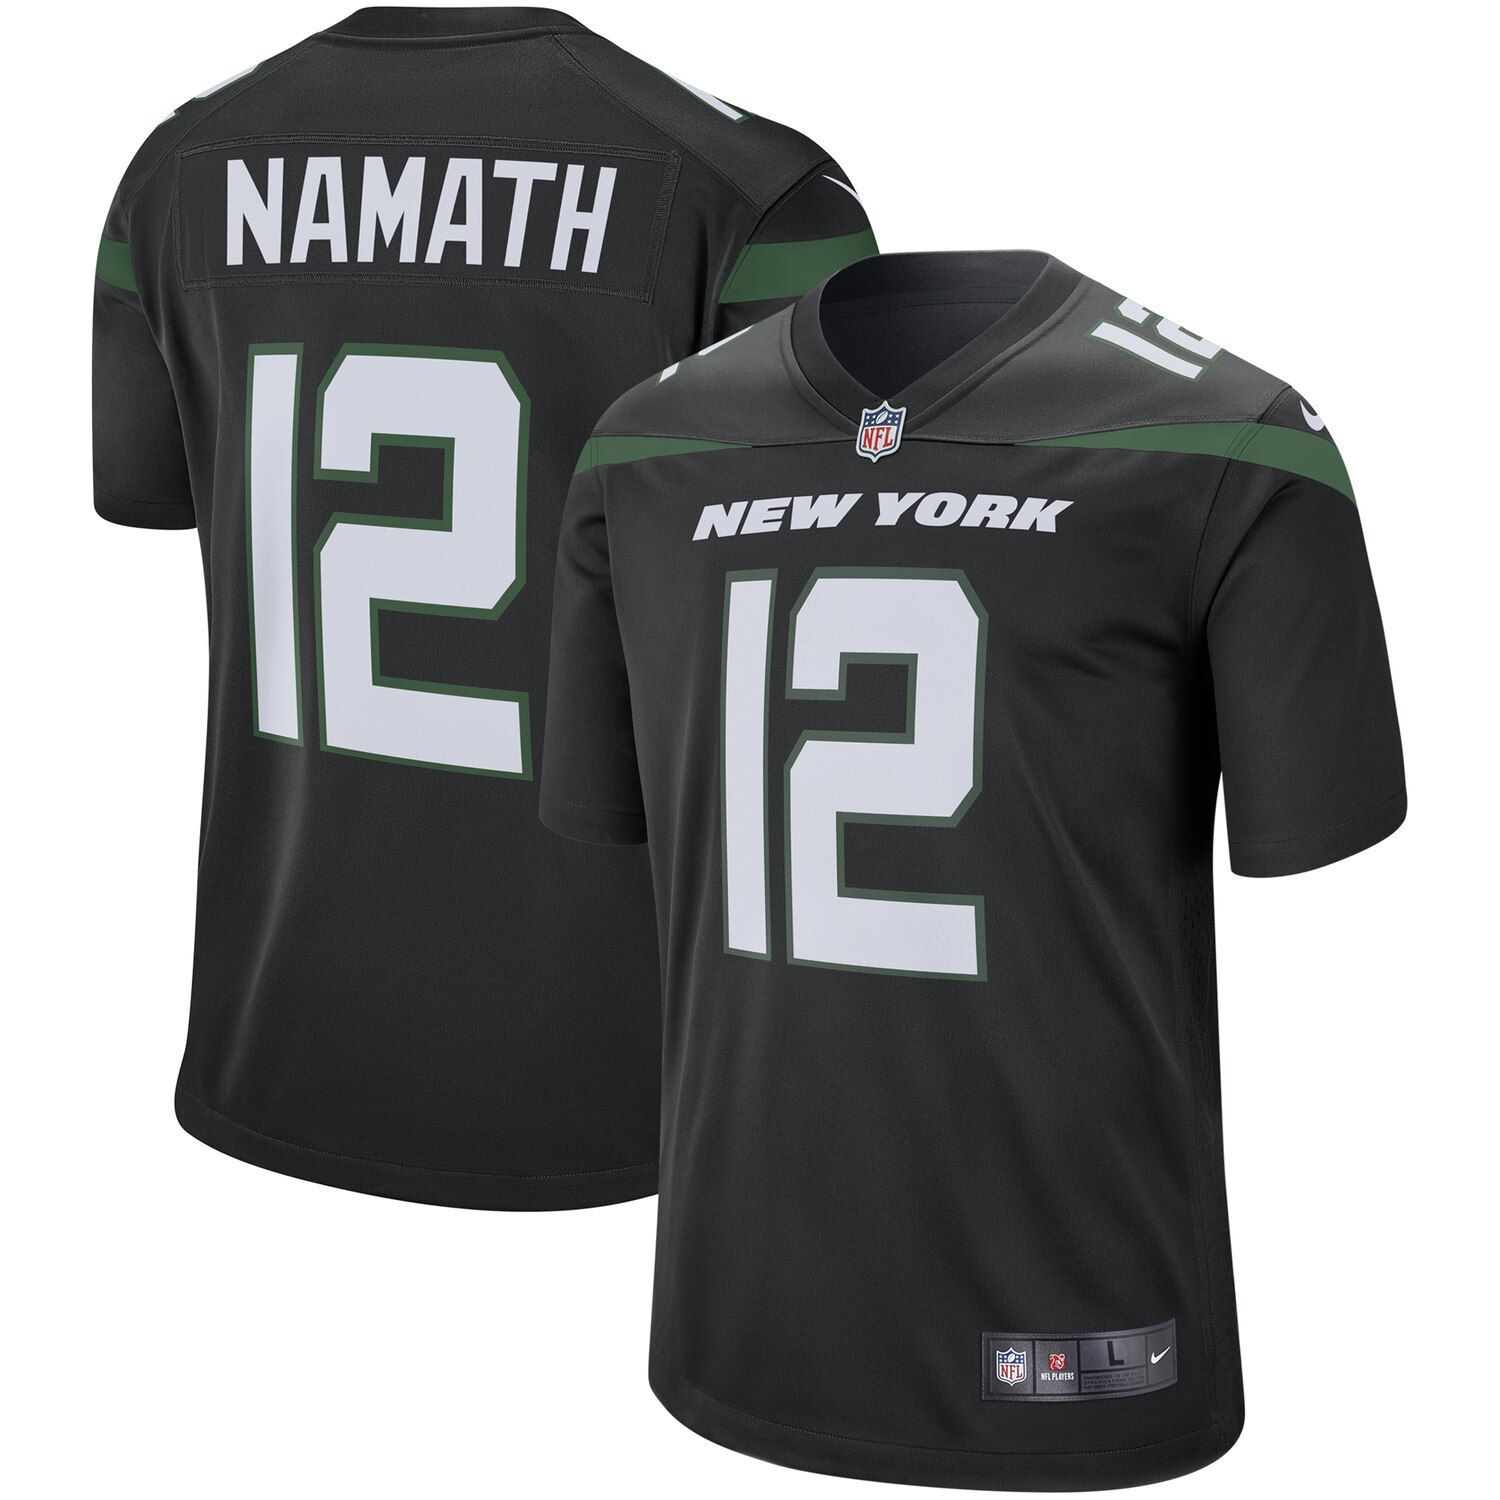 New York Jets Retired Player Game Jersey